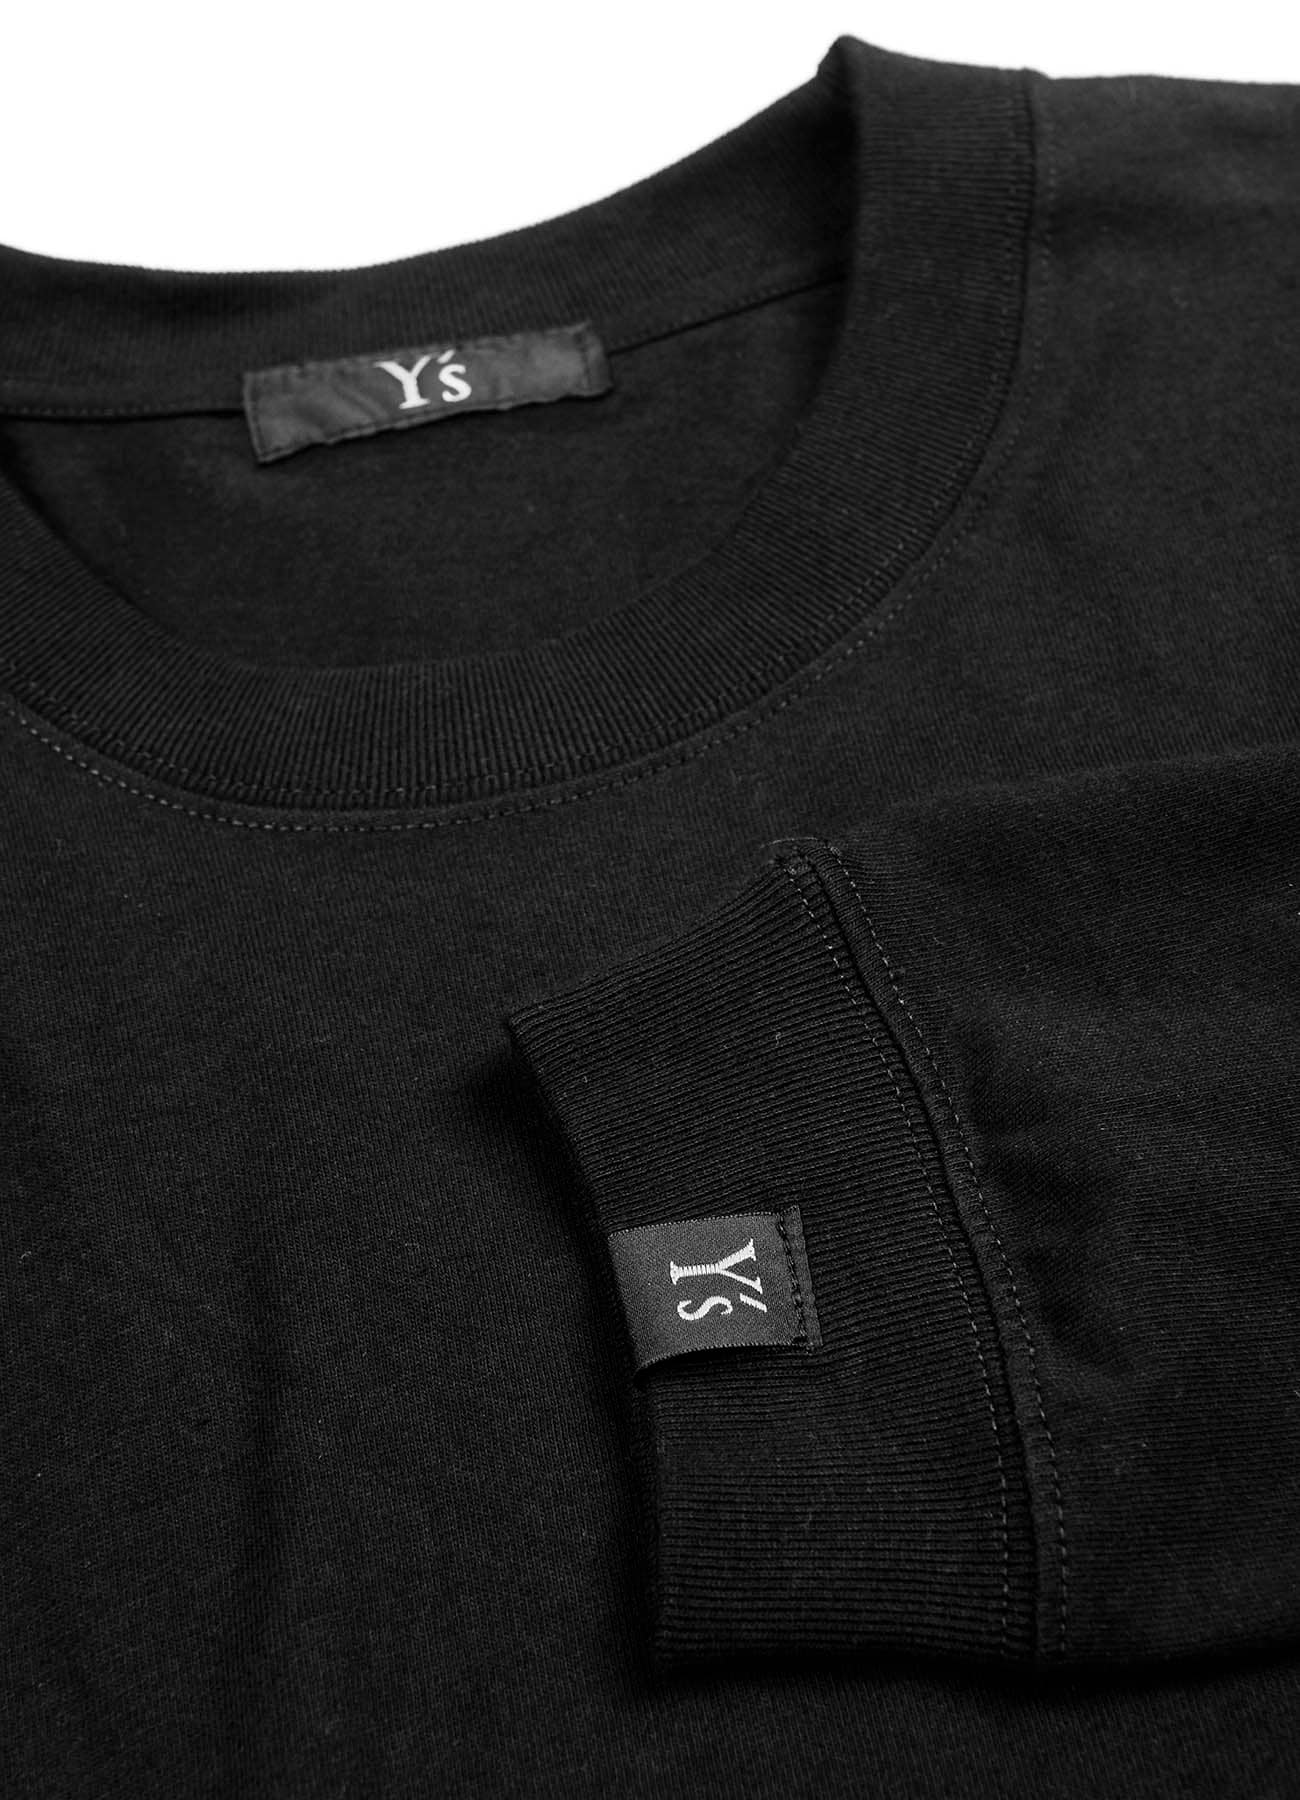 Online EXCLUSIVE-Y's logo Long sleeve T-shirts (Wide) (S Black 